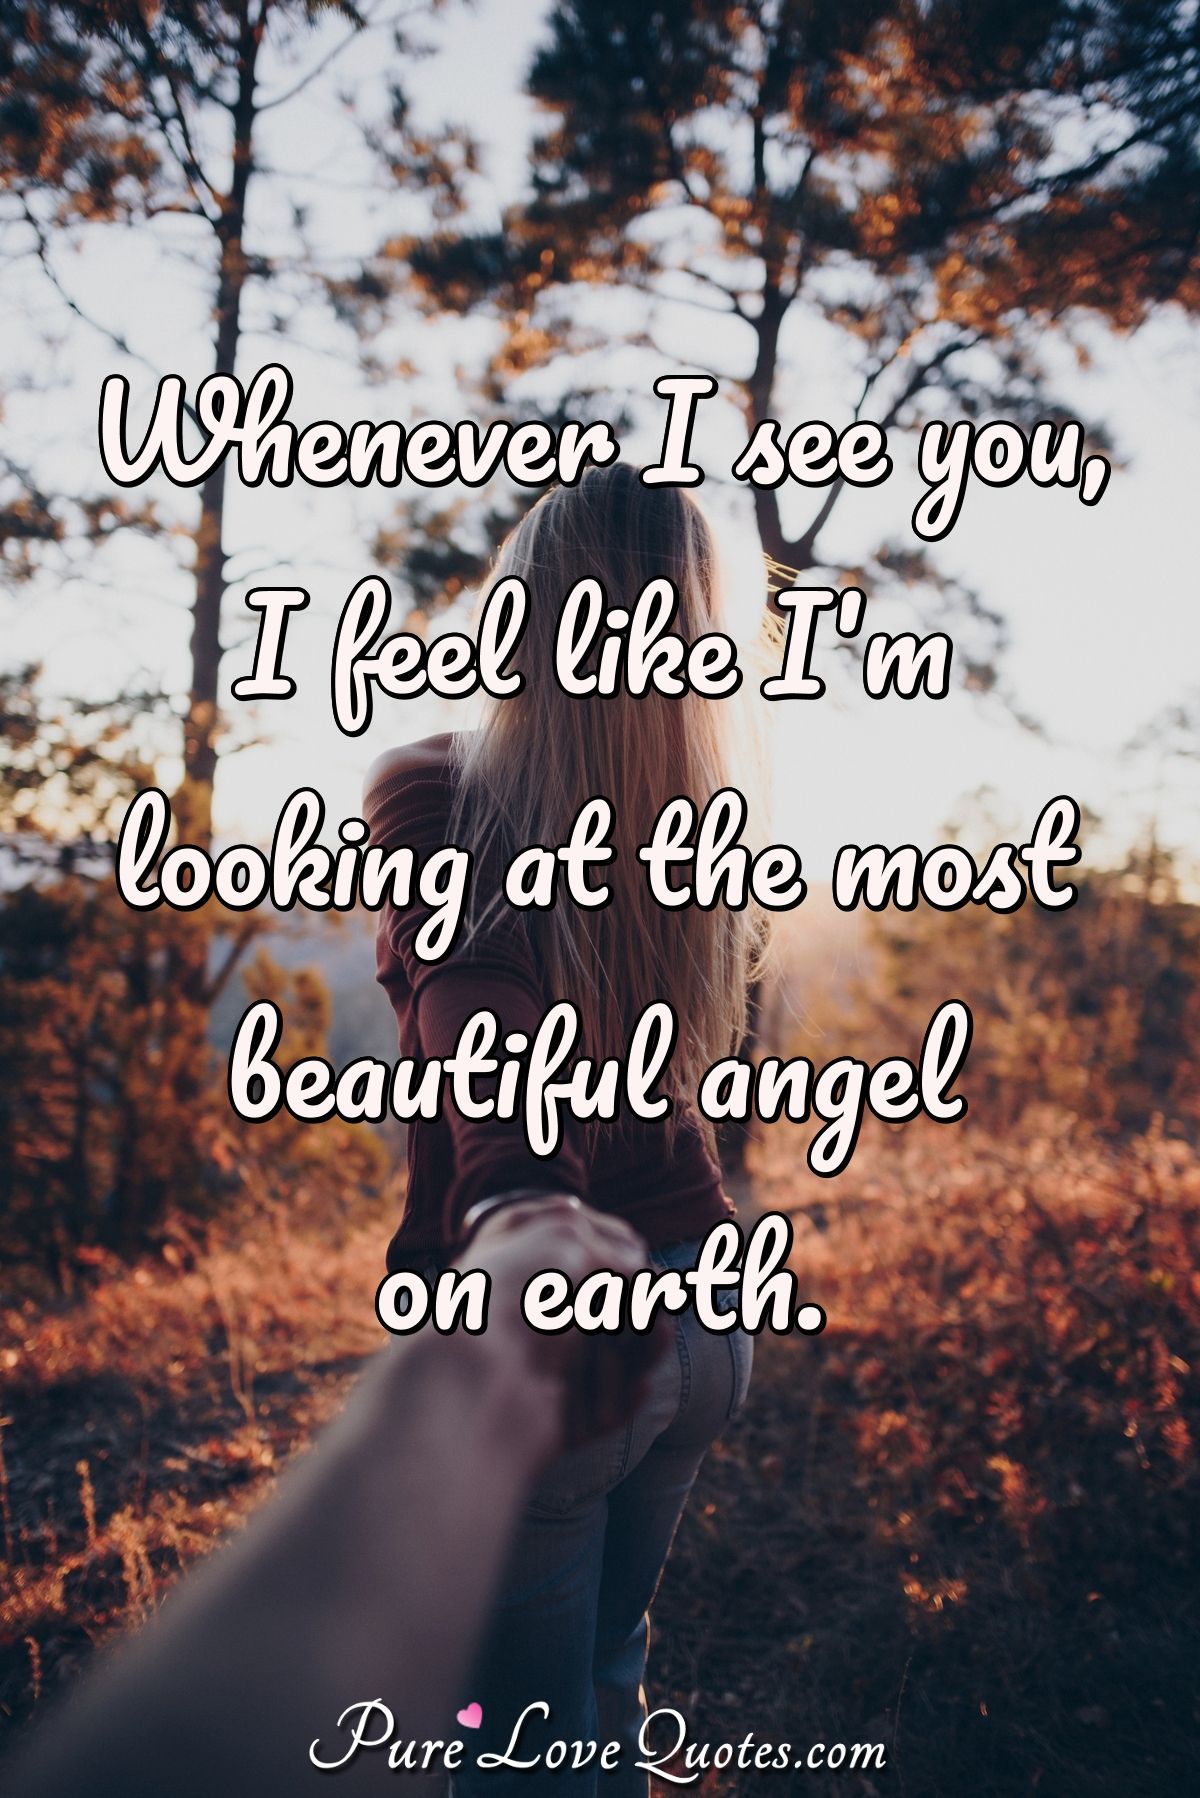 Whenever I see you, I feel like I'm looking at the most beautiful angel on earth. - Anonymous